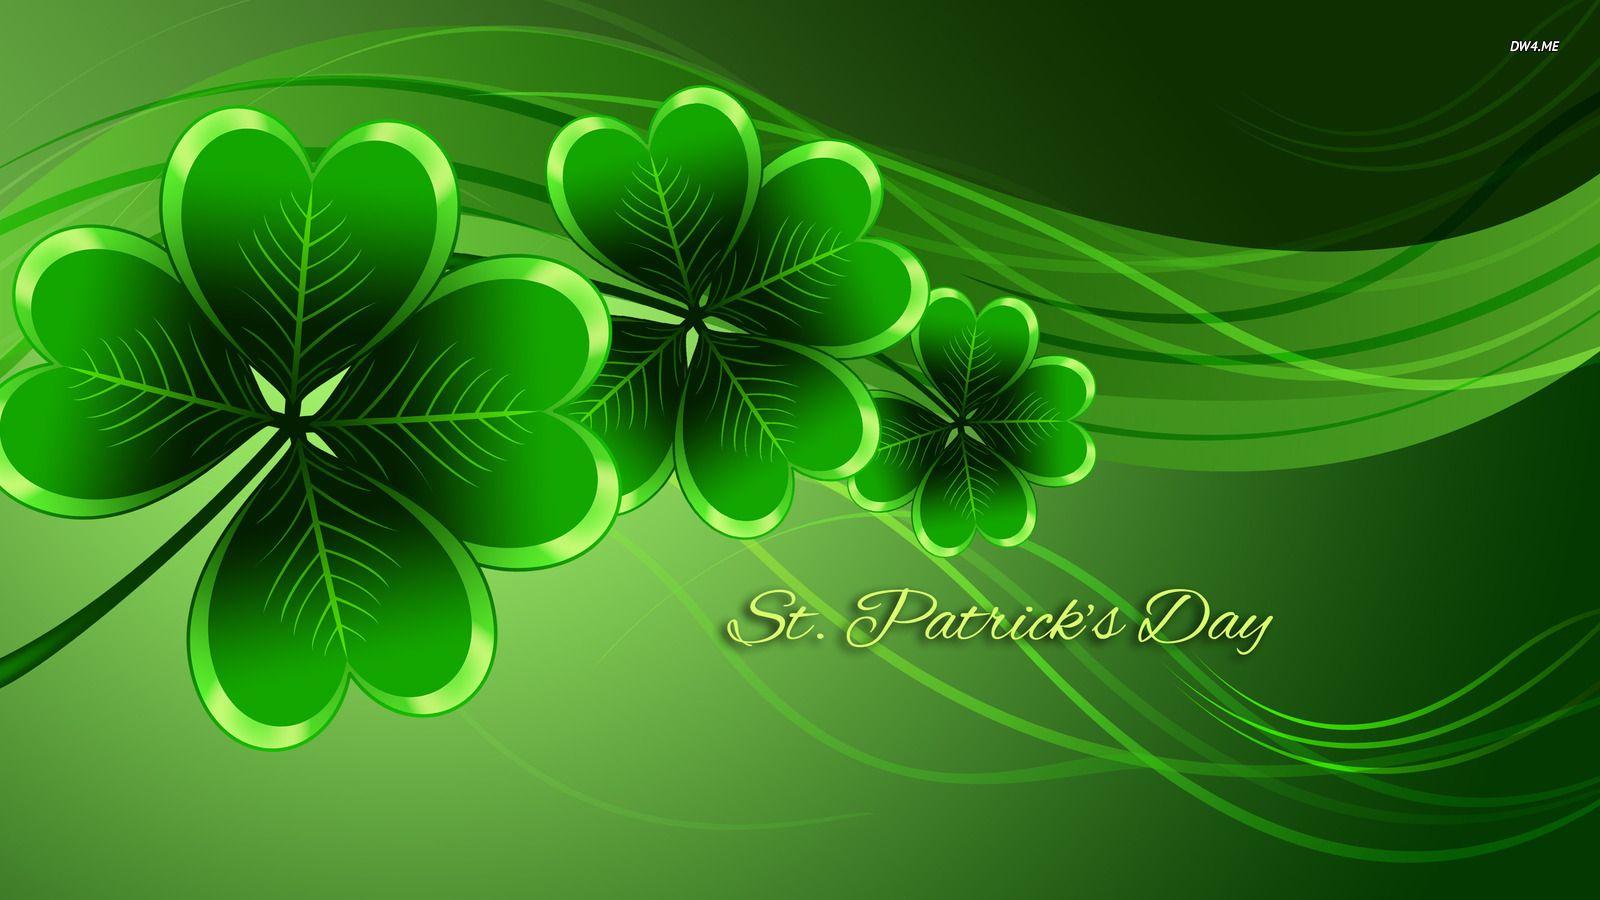 St Patrick's Day Wallpaper Background